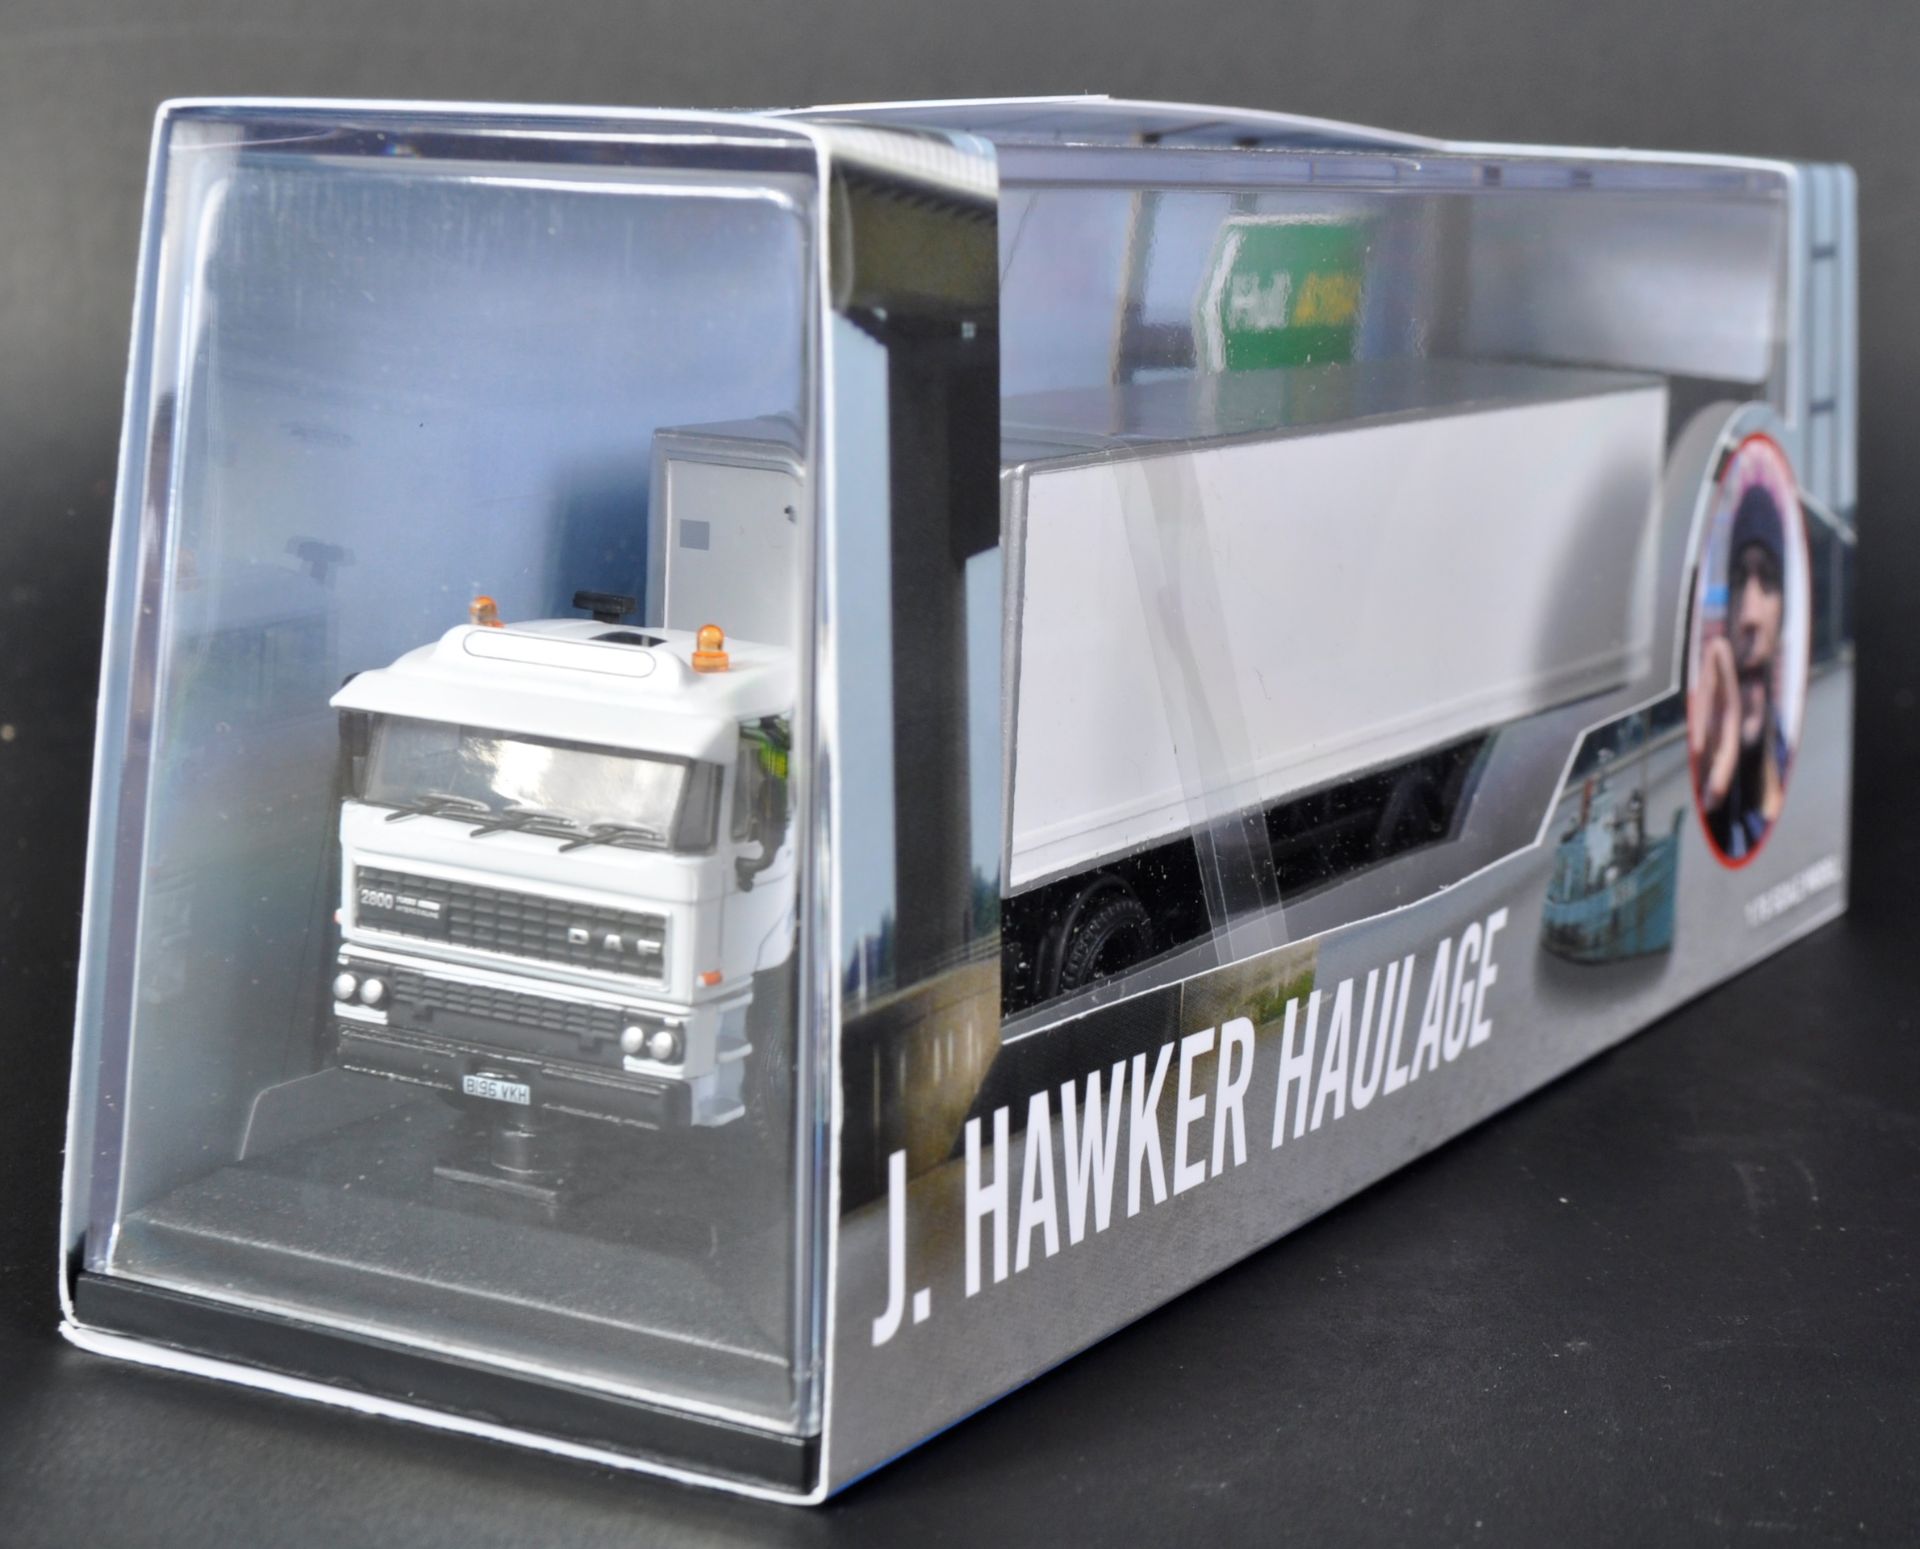 ONLY FOOLS & HORSES - 1/76 SCALE AUTOGRAPHED LORRY DIECAST MODEL - Image 2 of 6